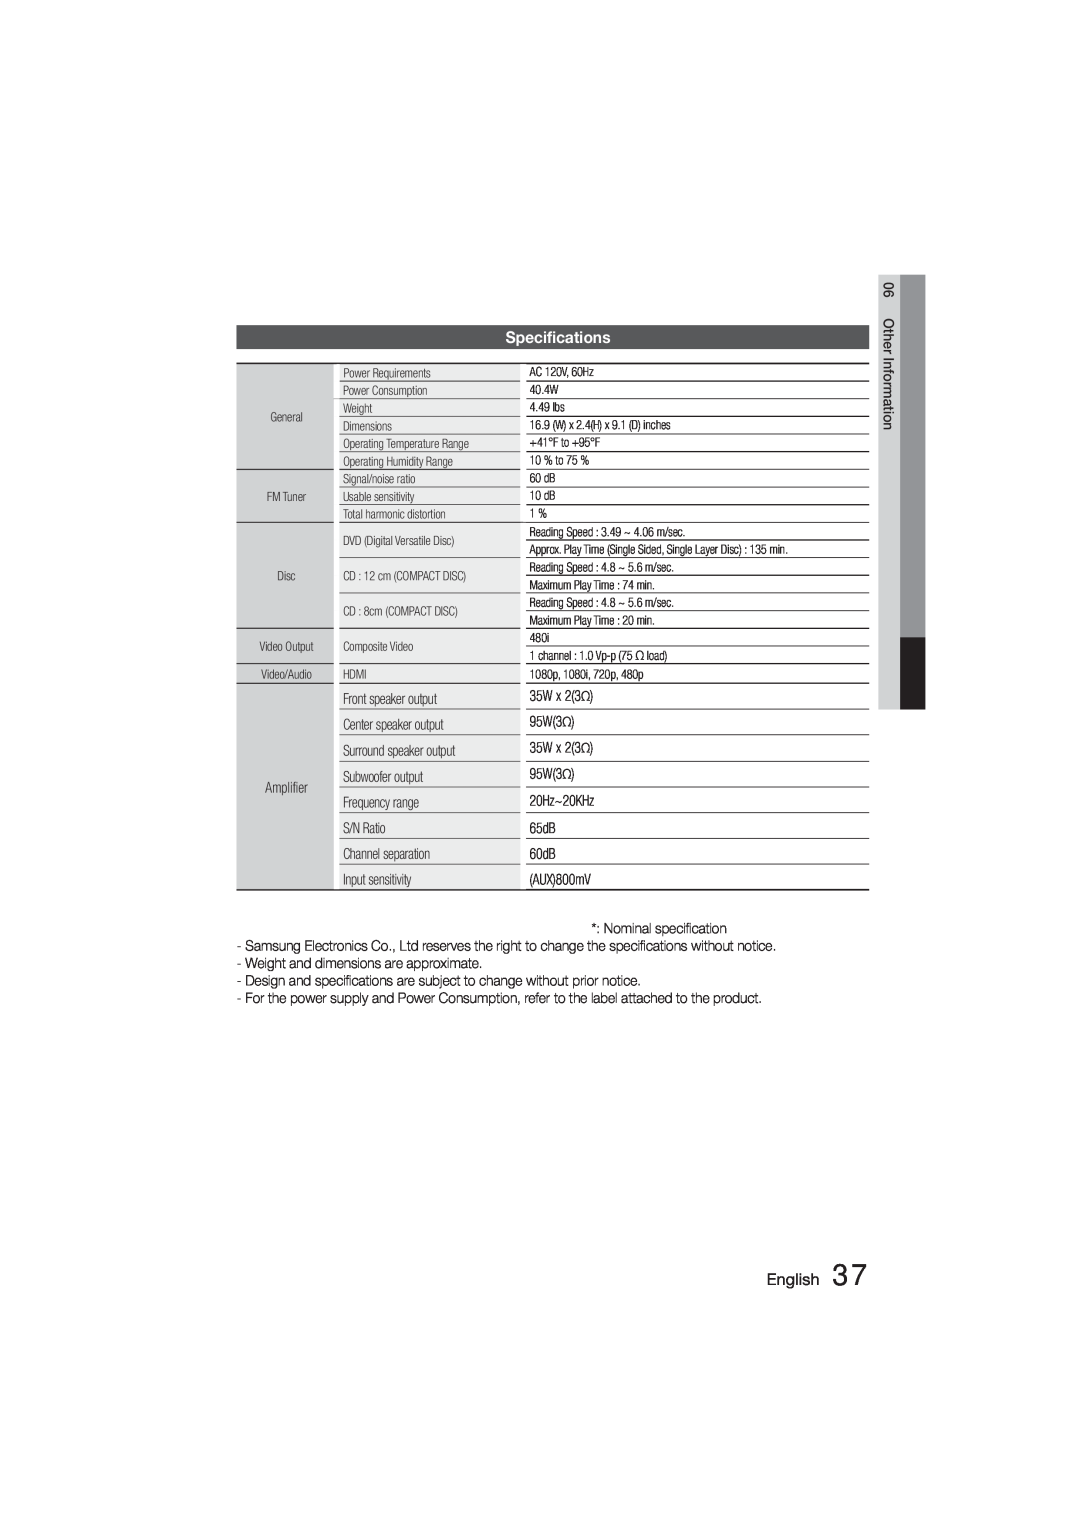 Samsung HT-355, HT-E350 user manual Specifications, English 